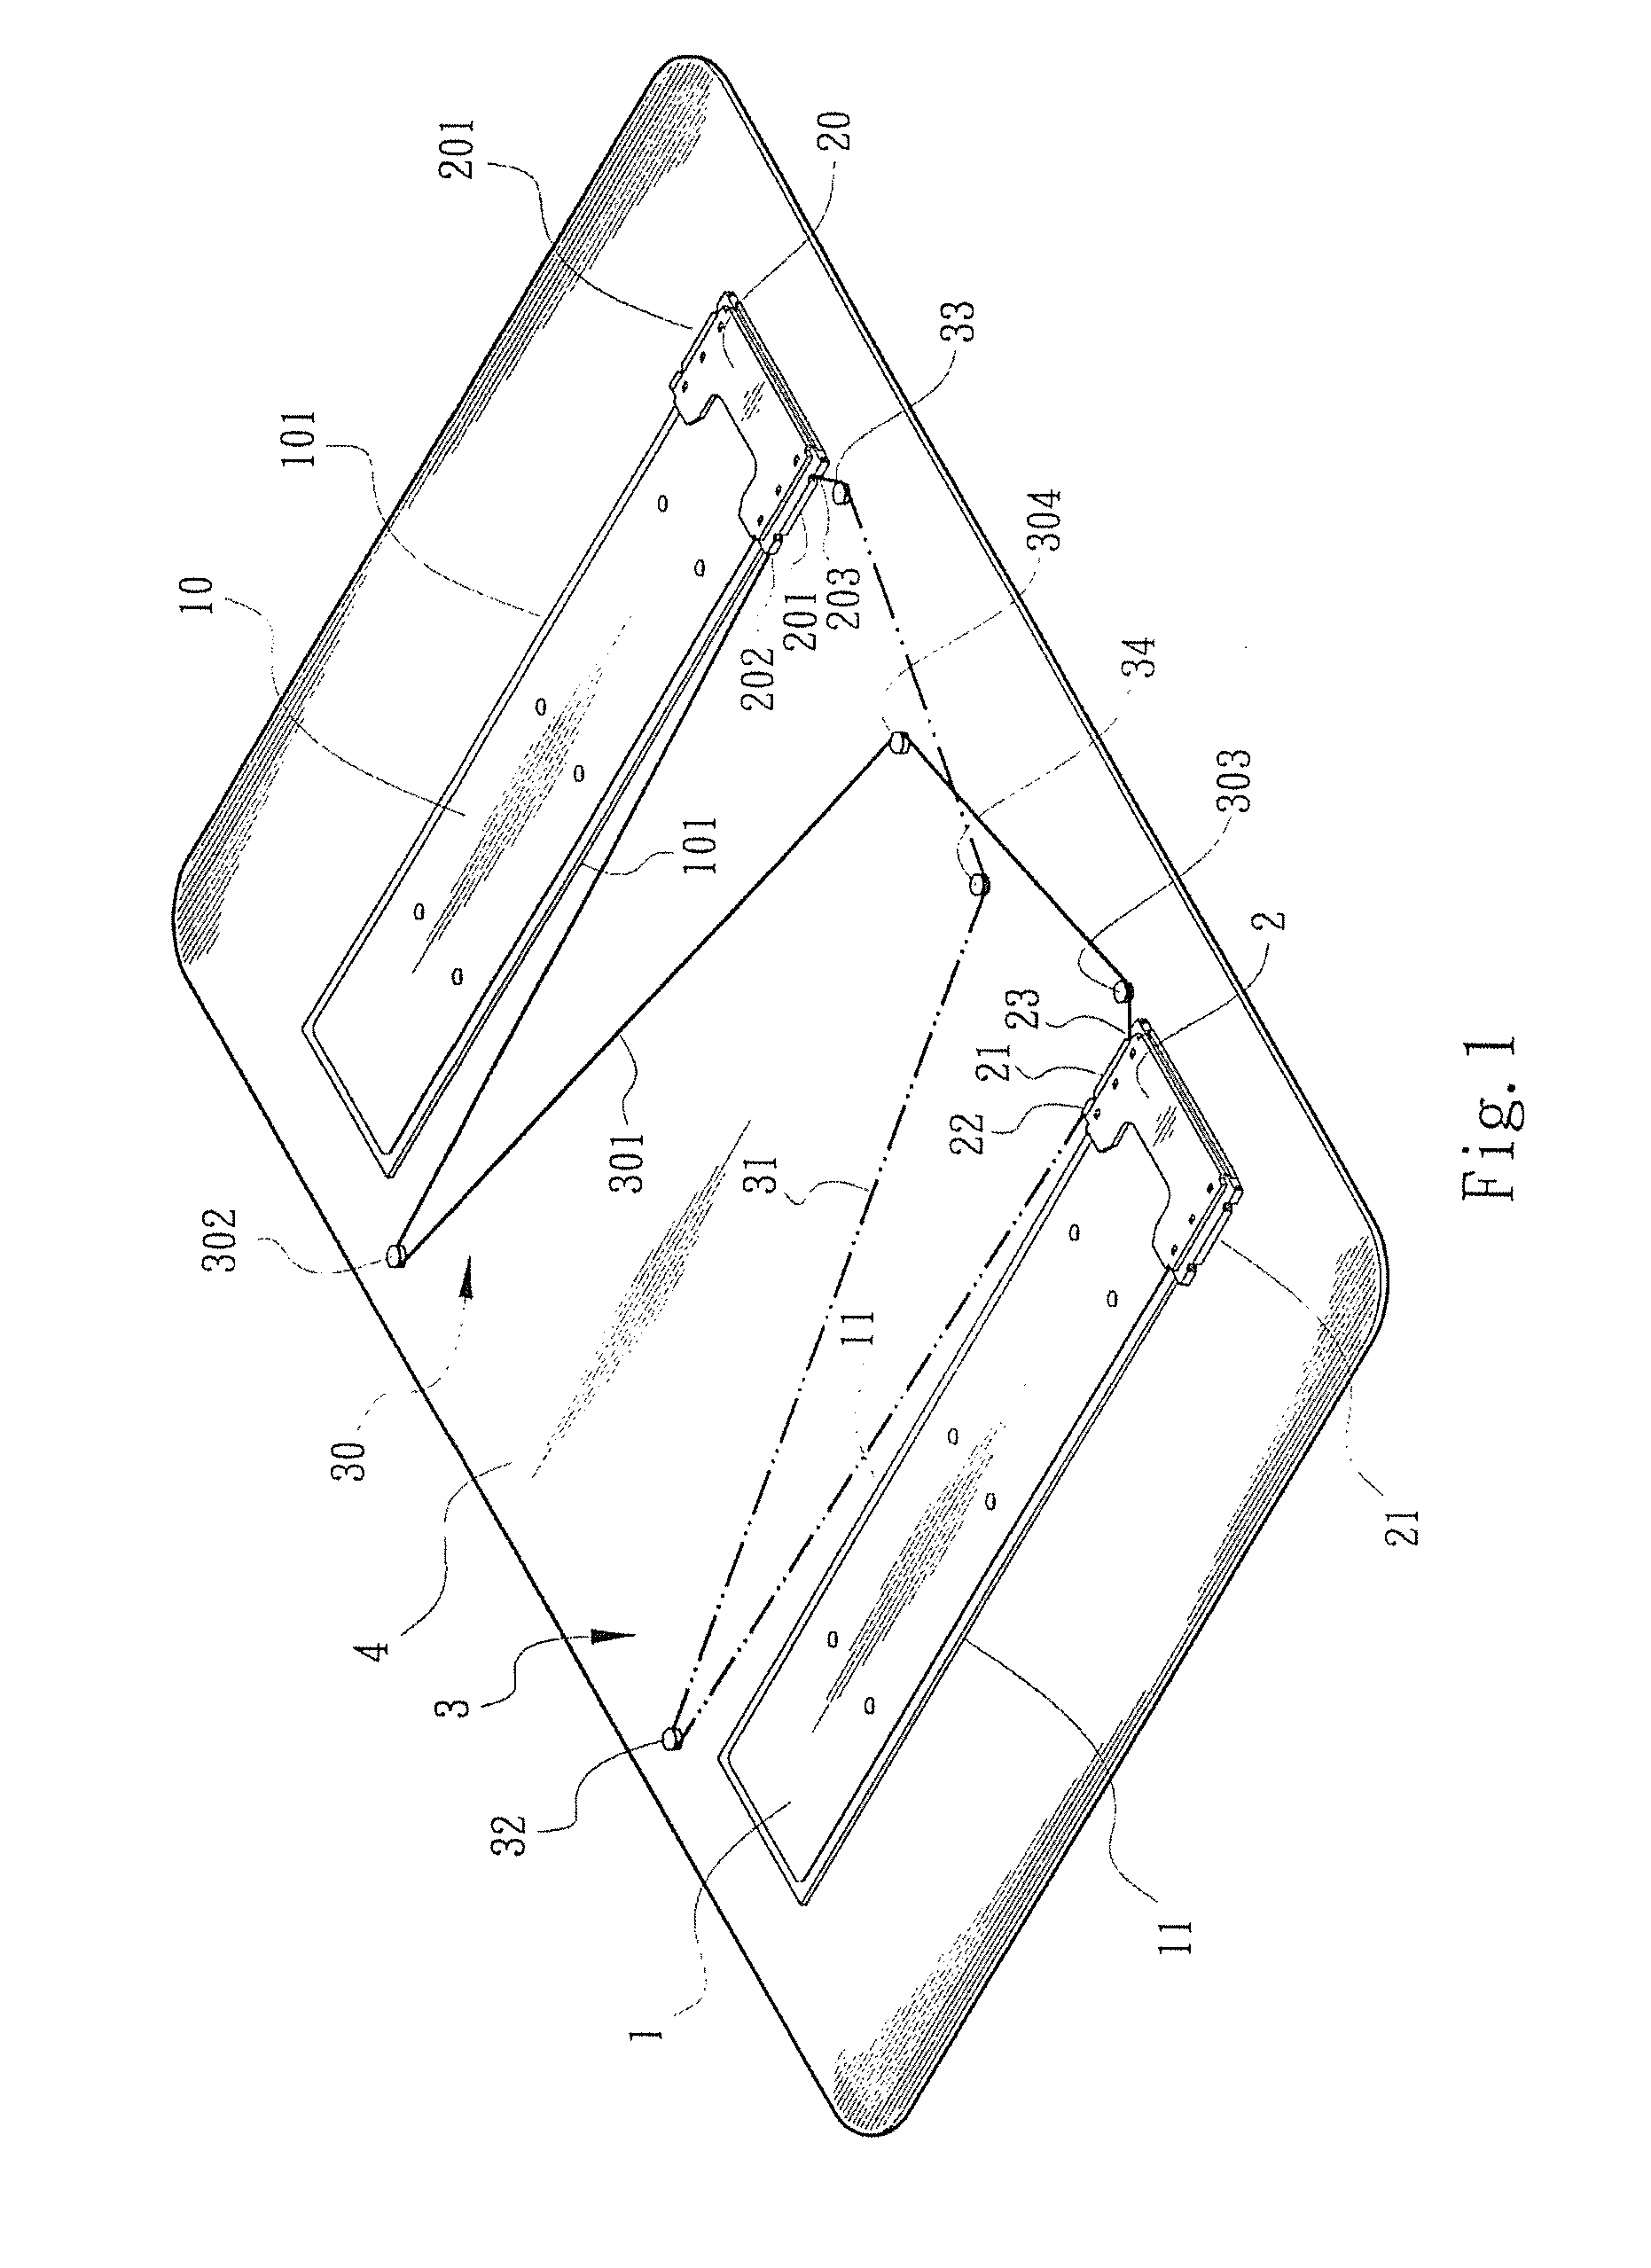 Synchronous pull device for slide cover mechanism